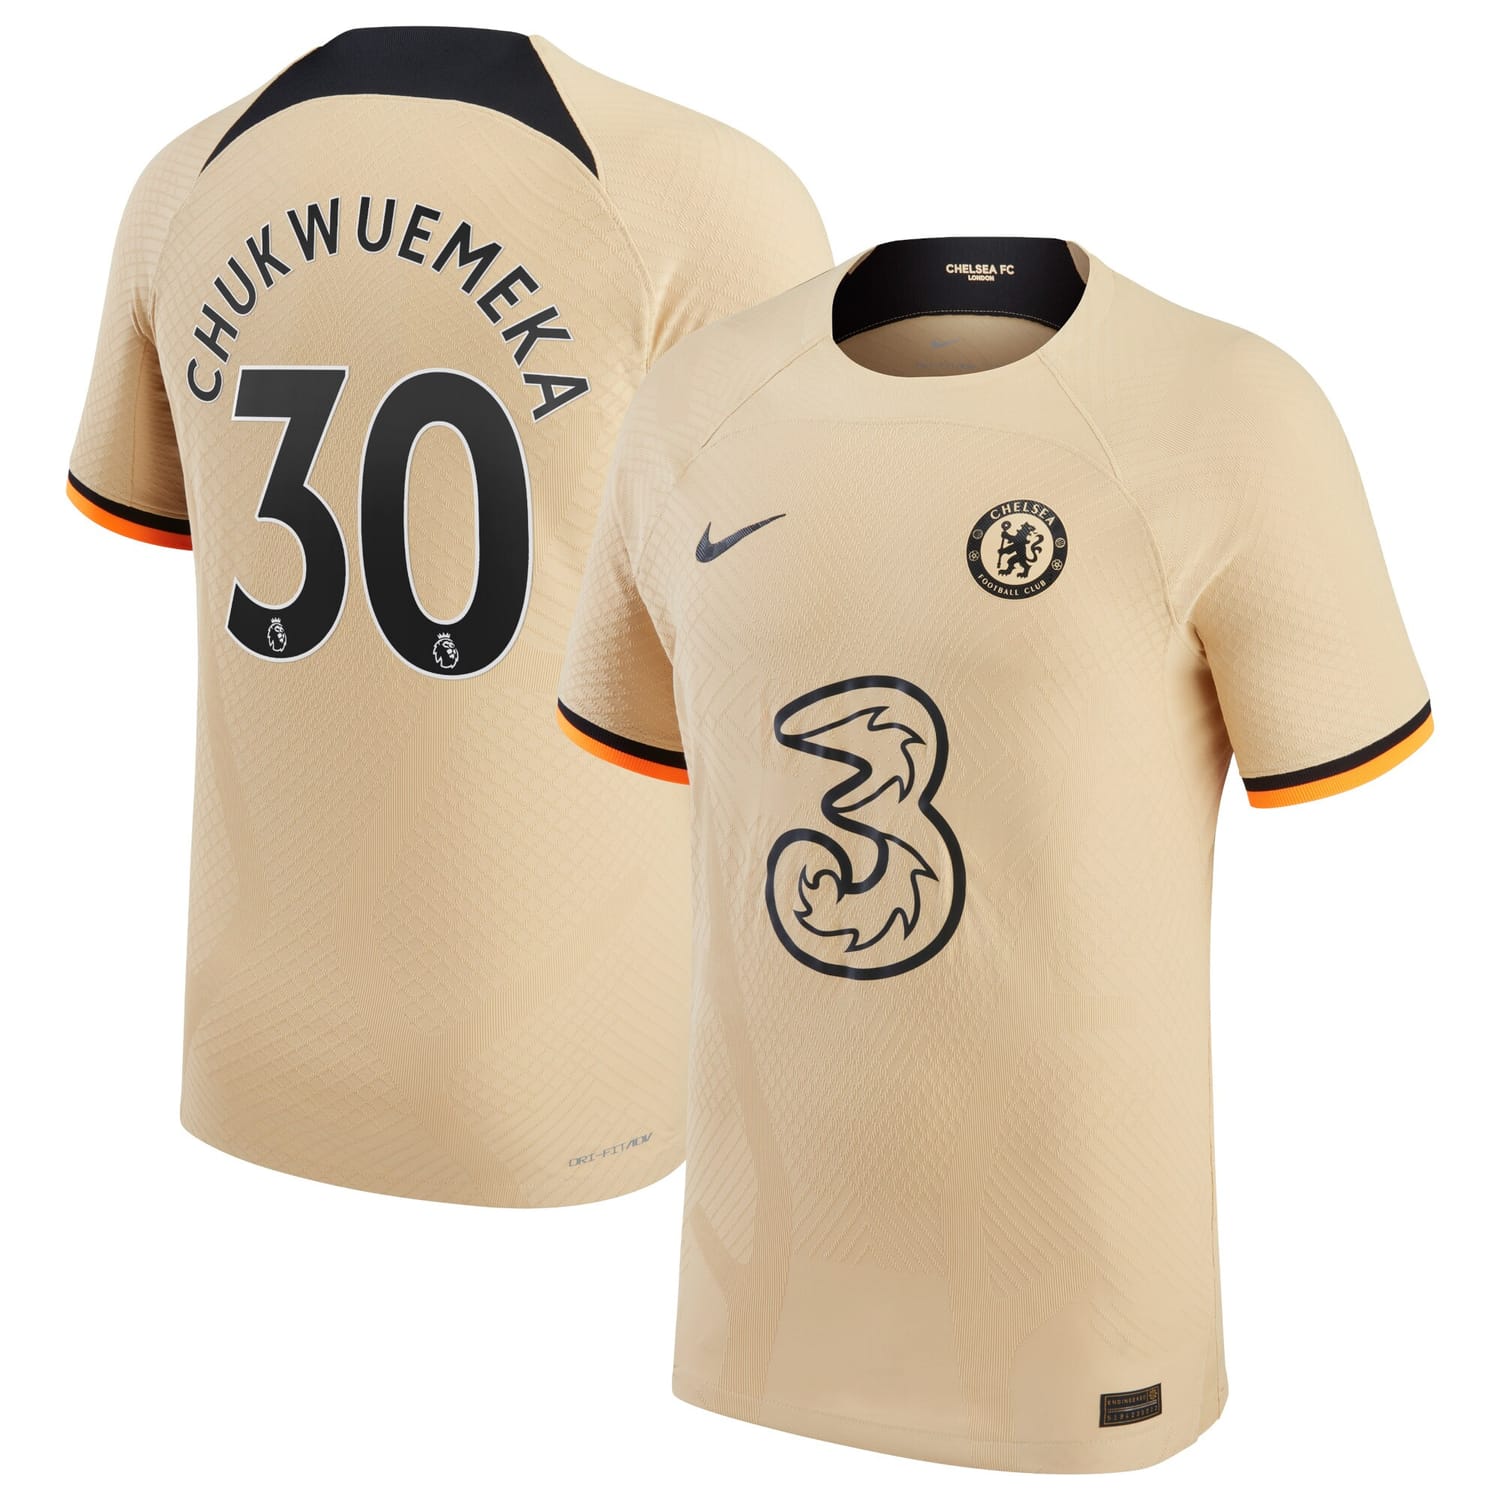 Premier League Chelsea Third Authentic Jersey Shirt 2022-23 player Carney Chukwuemeka 30 printing for Men